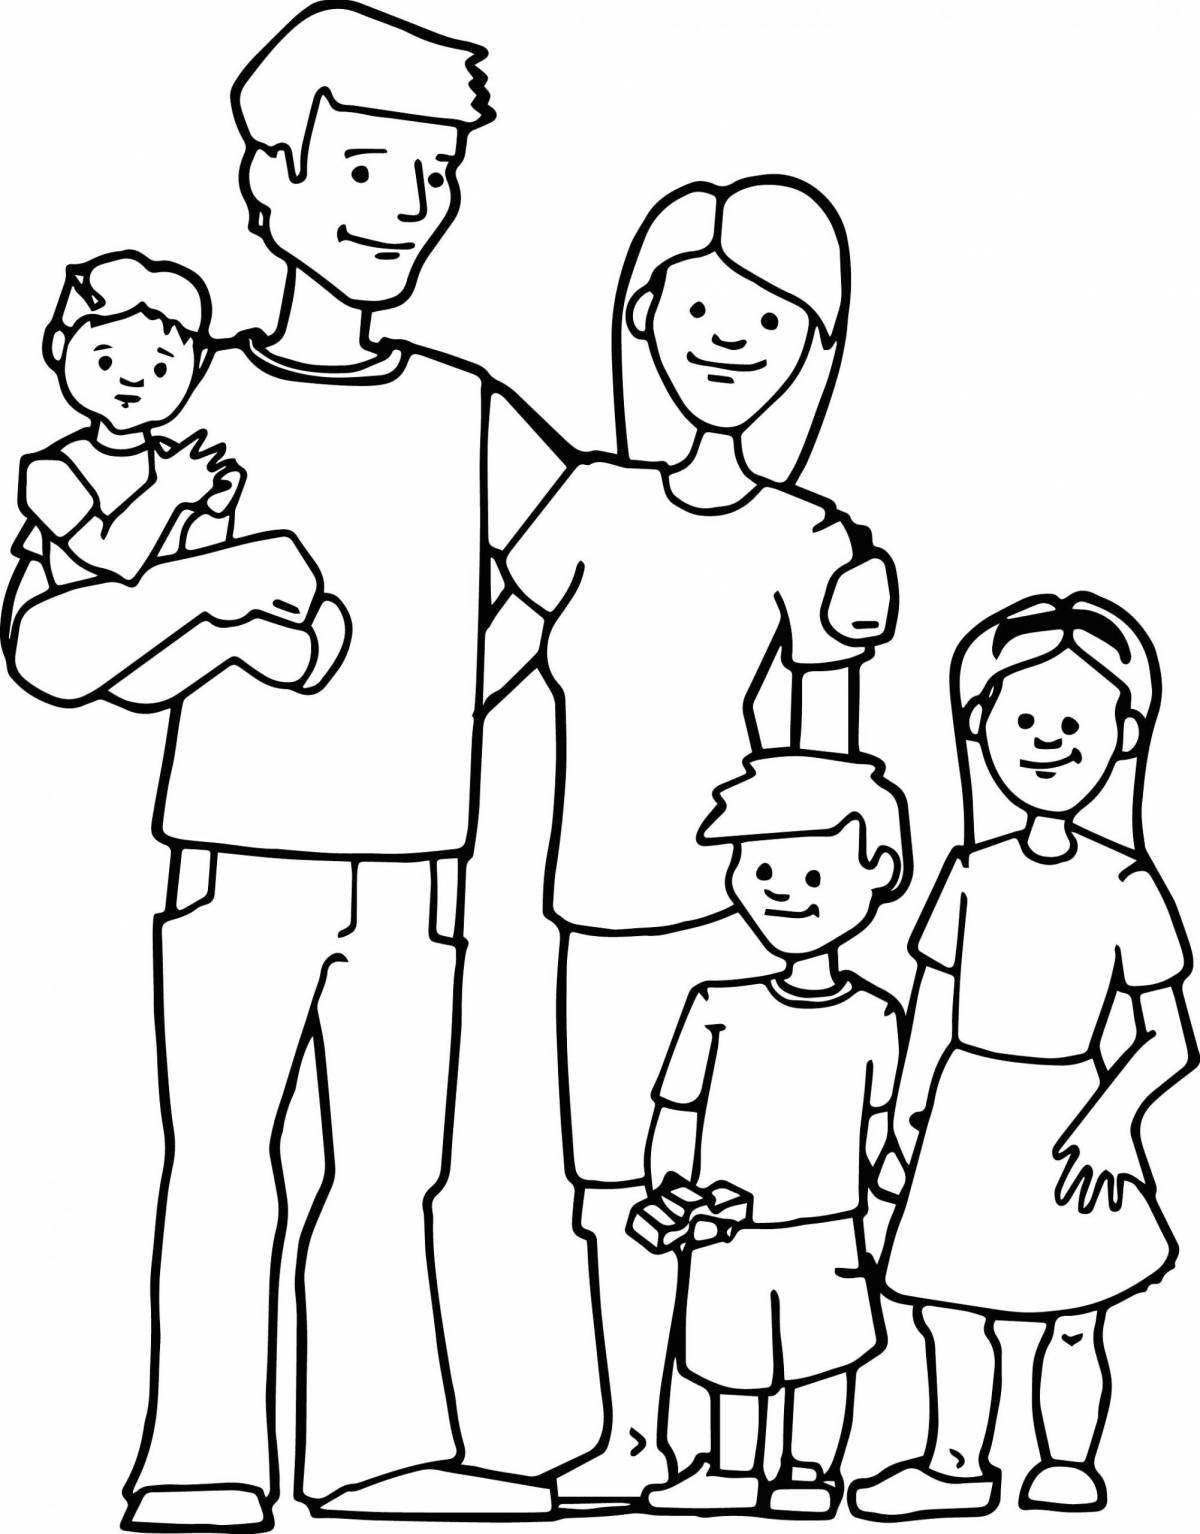 Adorable mom and dad coloring pages